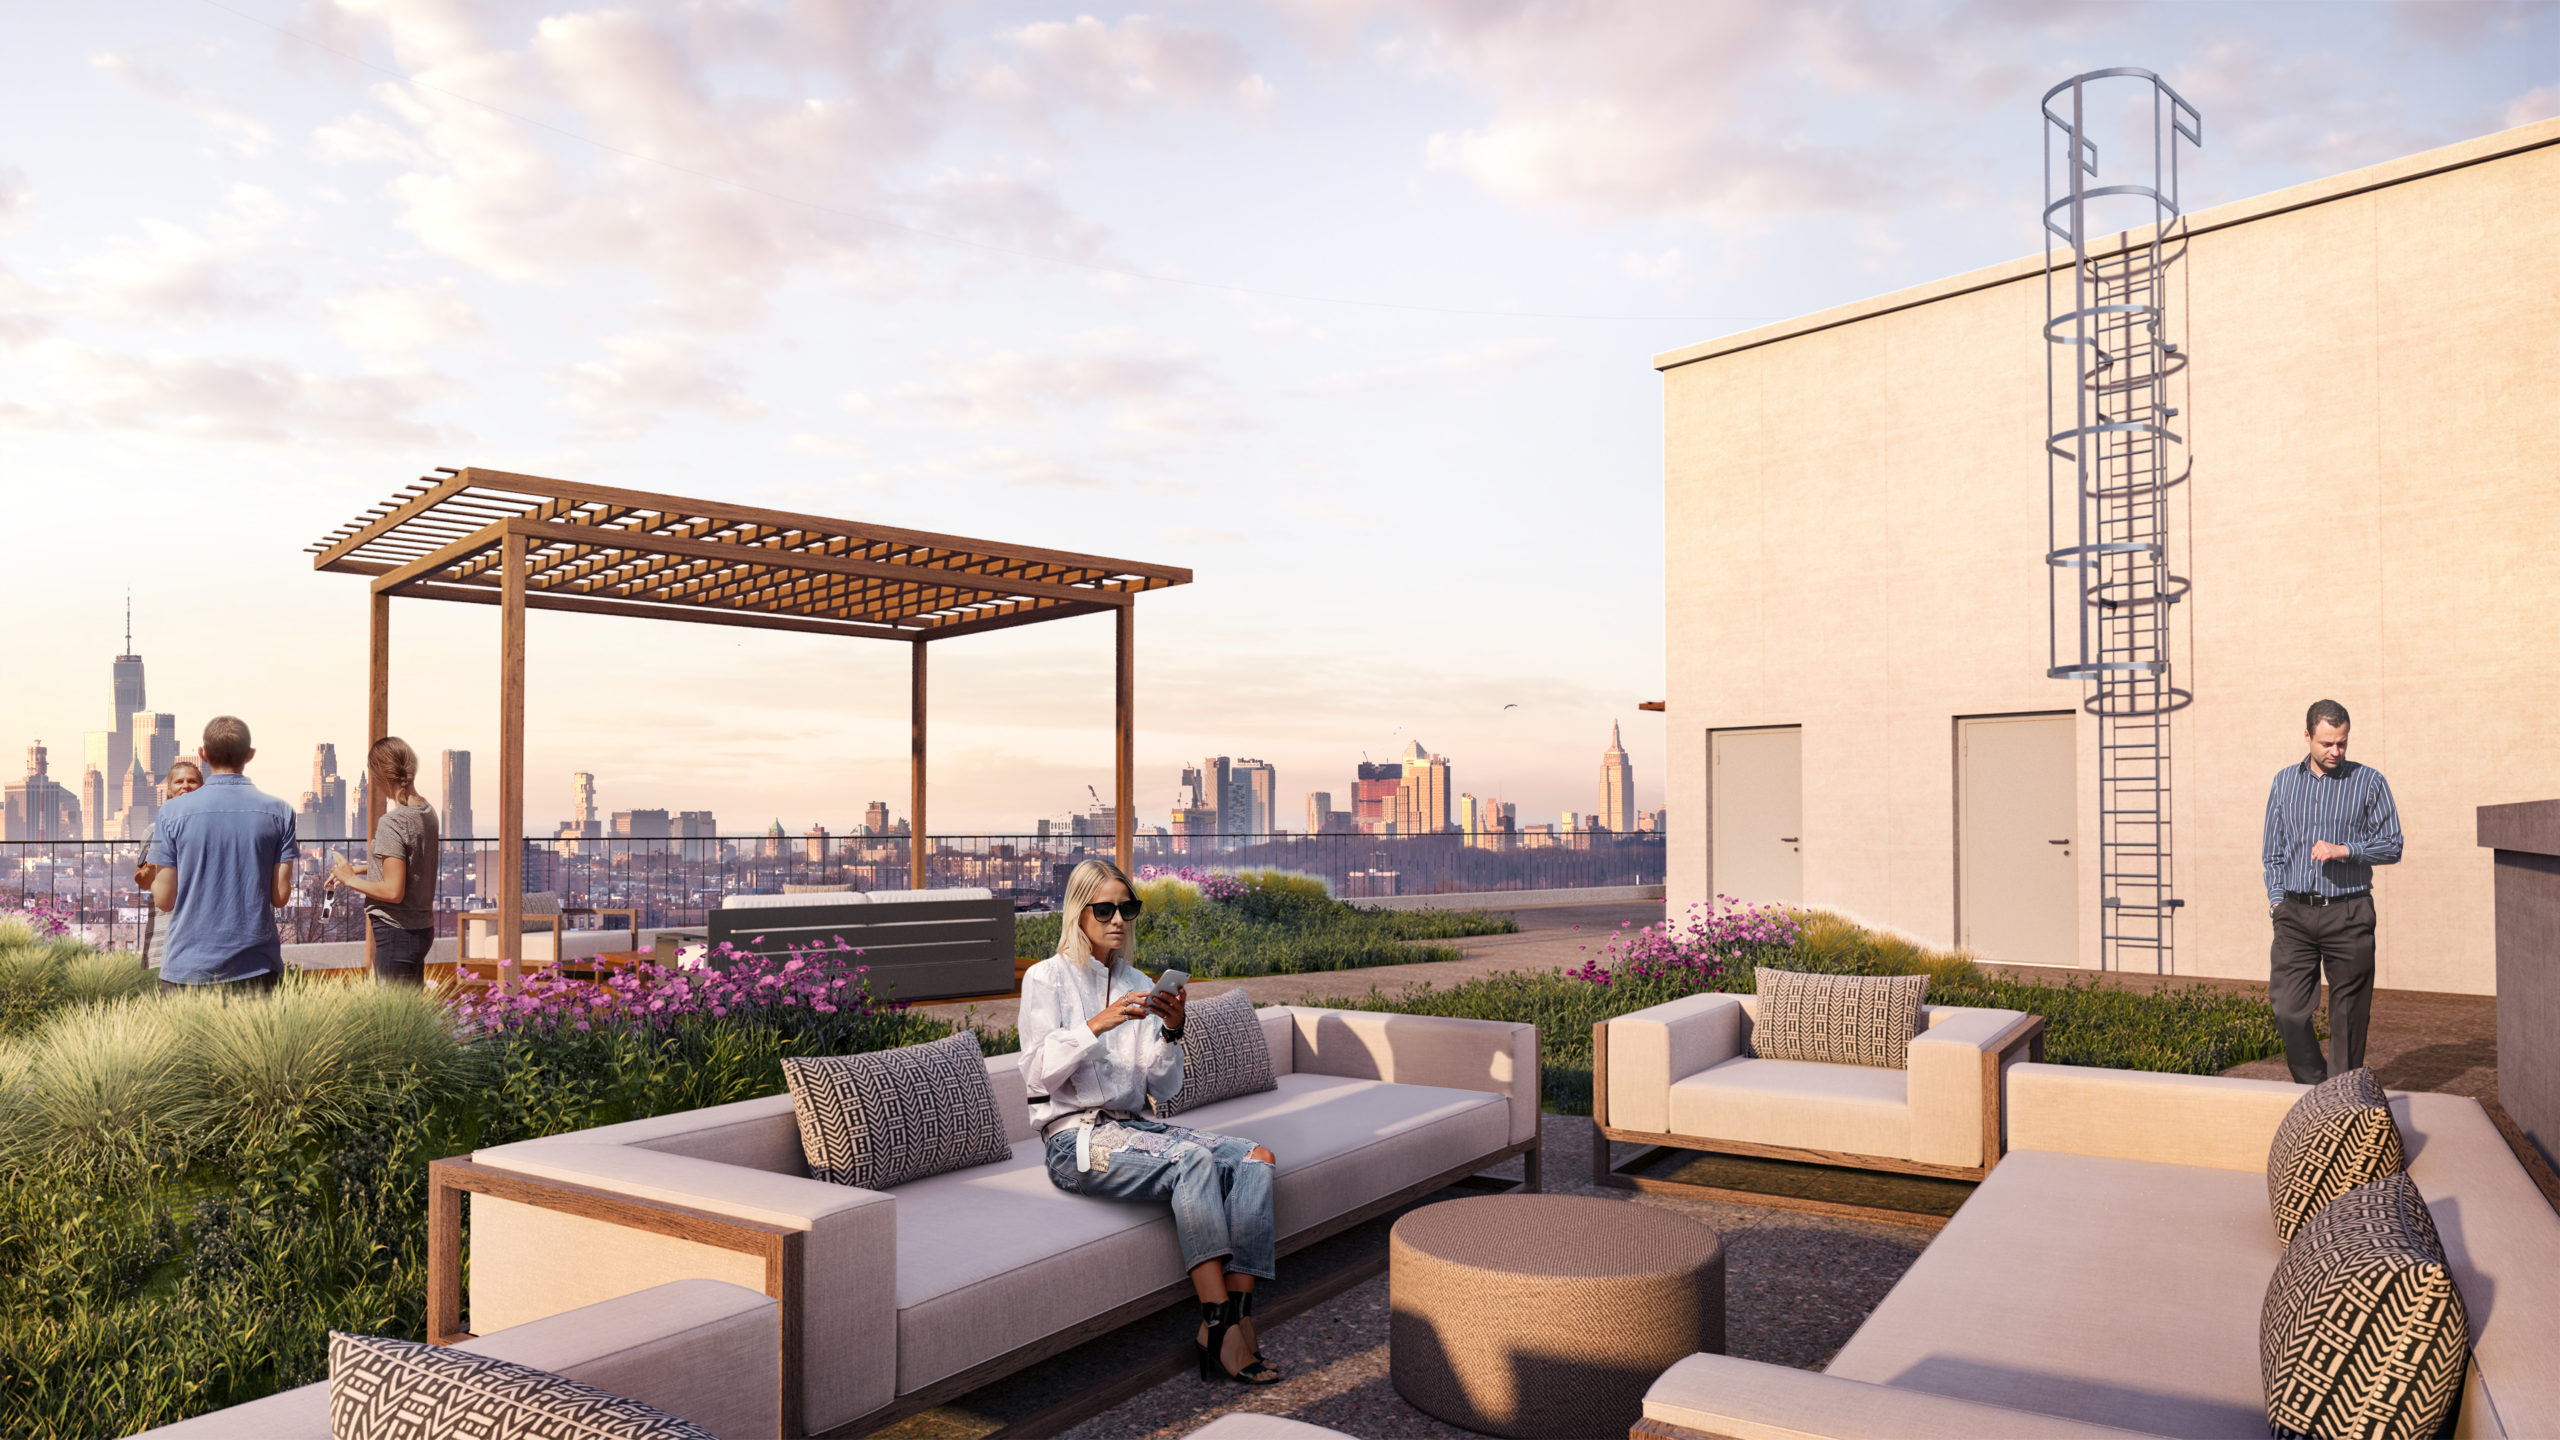 Rooftop patio with a lattice awning overlooking the city at the Vitagraph Brooklyn